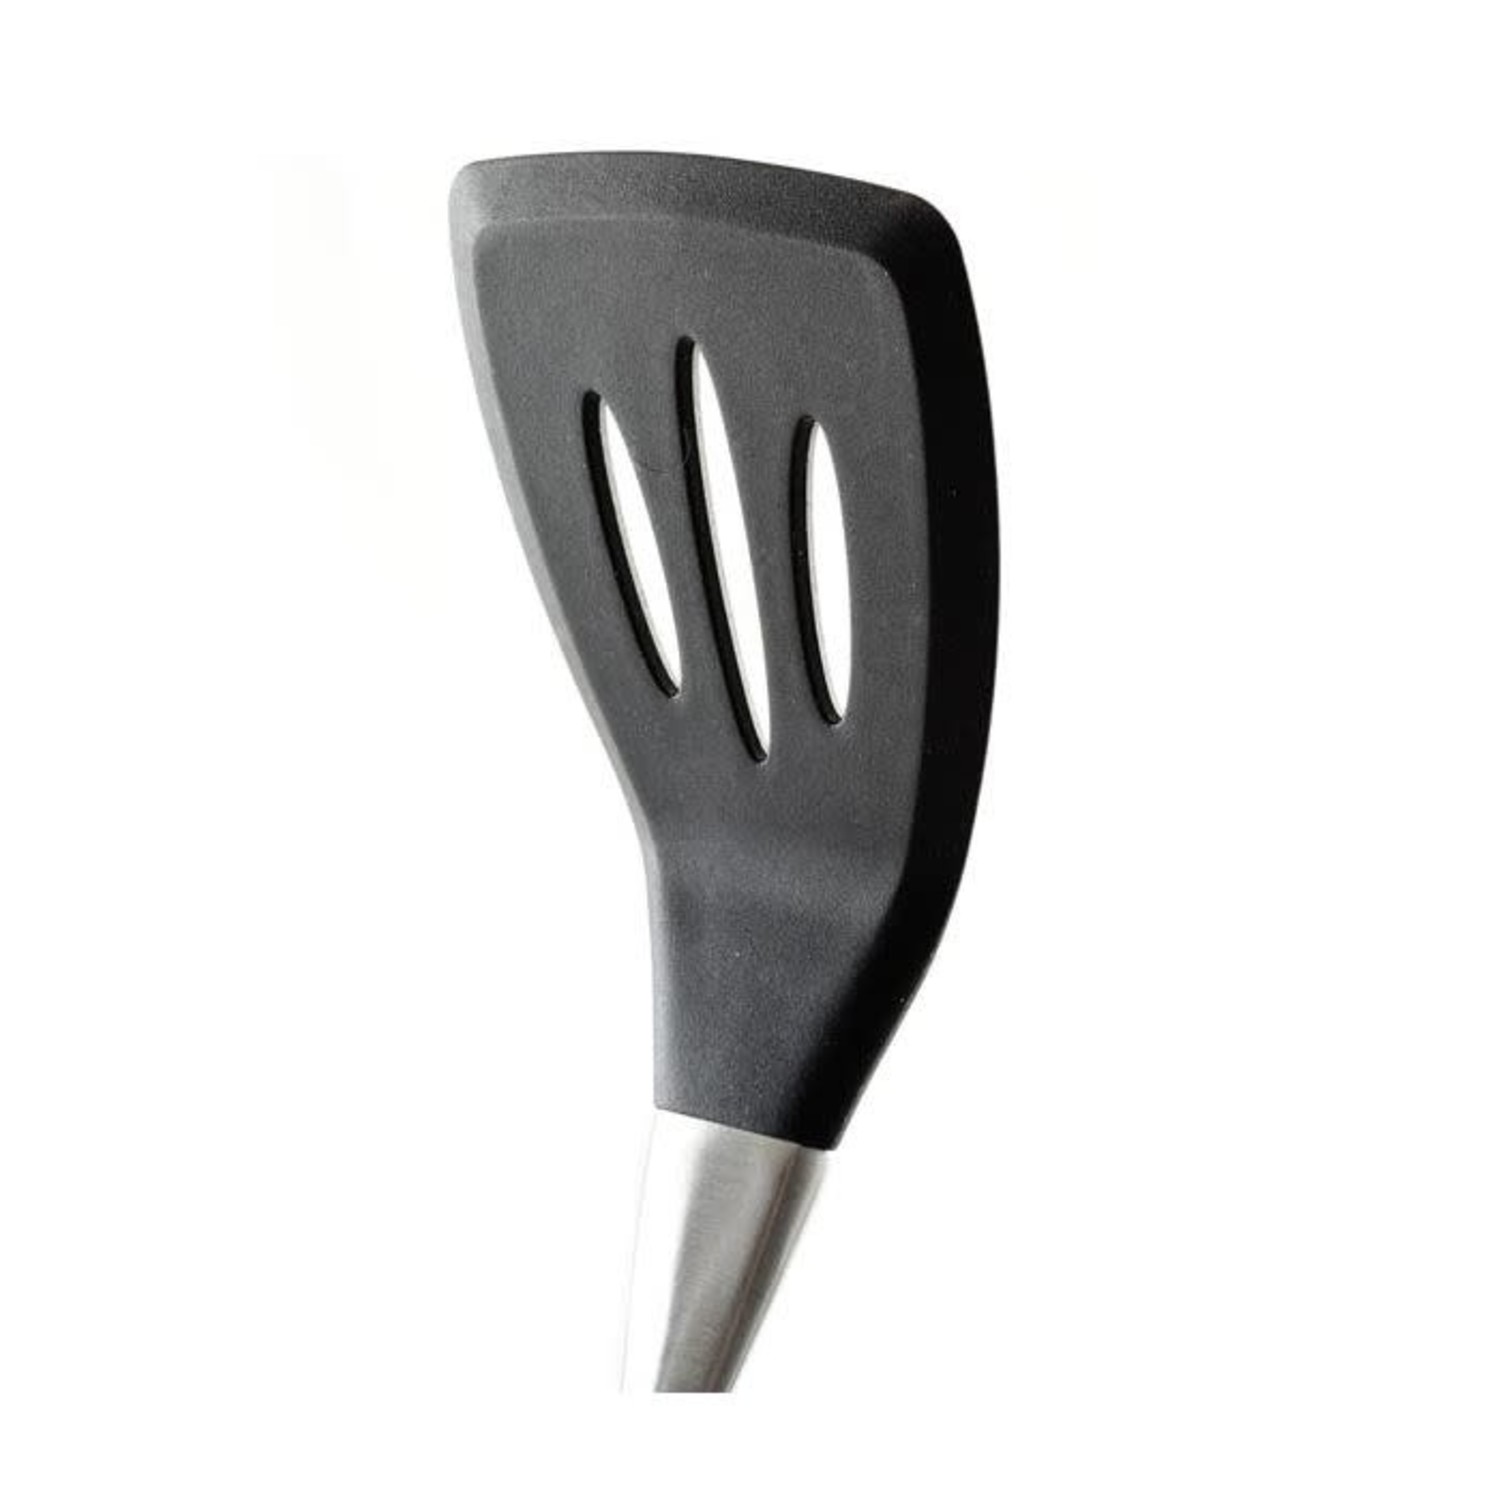 https://cdn.shoplightspeed.com/shops/633447/files/45022801/1500x4000x3/silicone-offset-slotted-turner-spatula-with-stainl.jpg